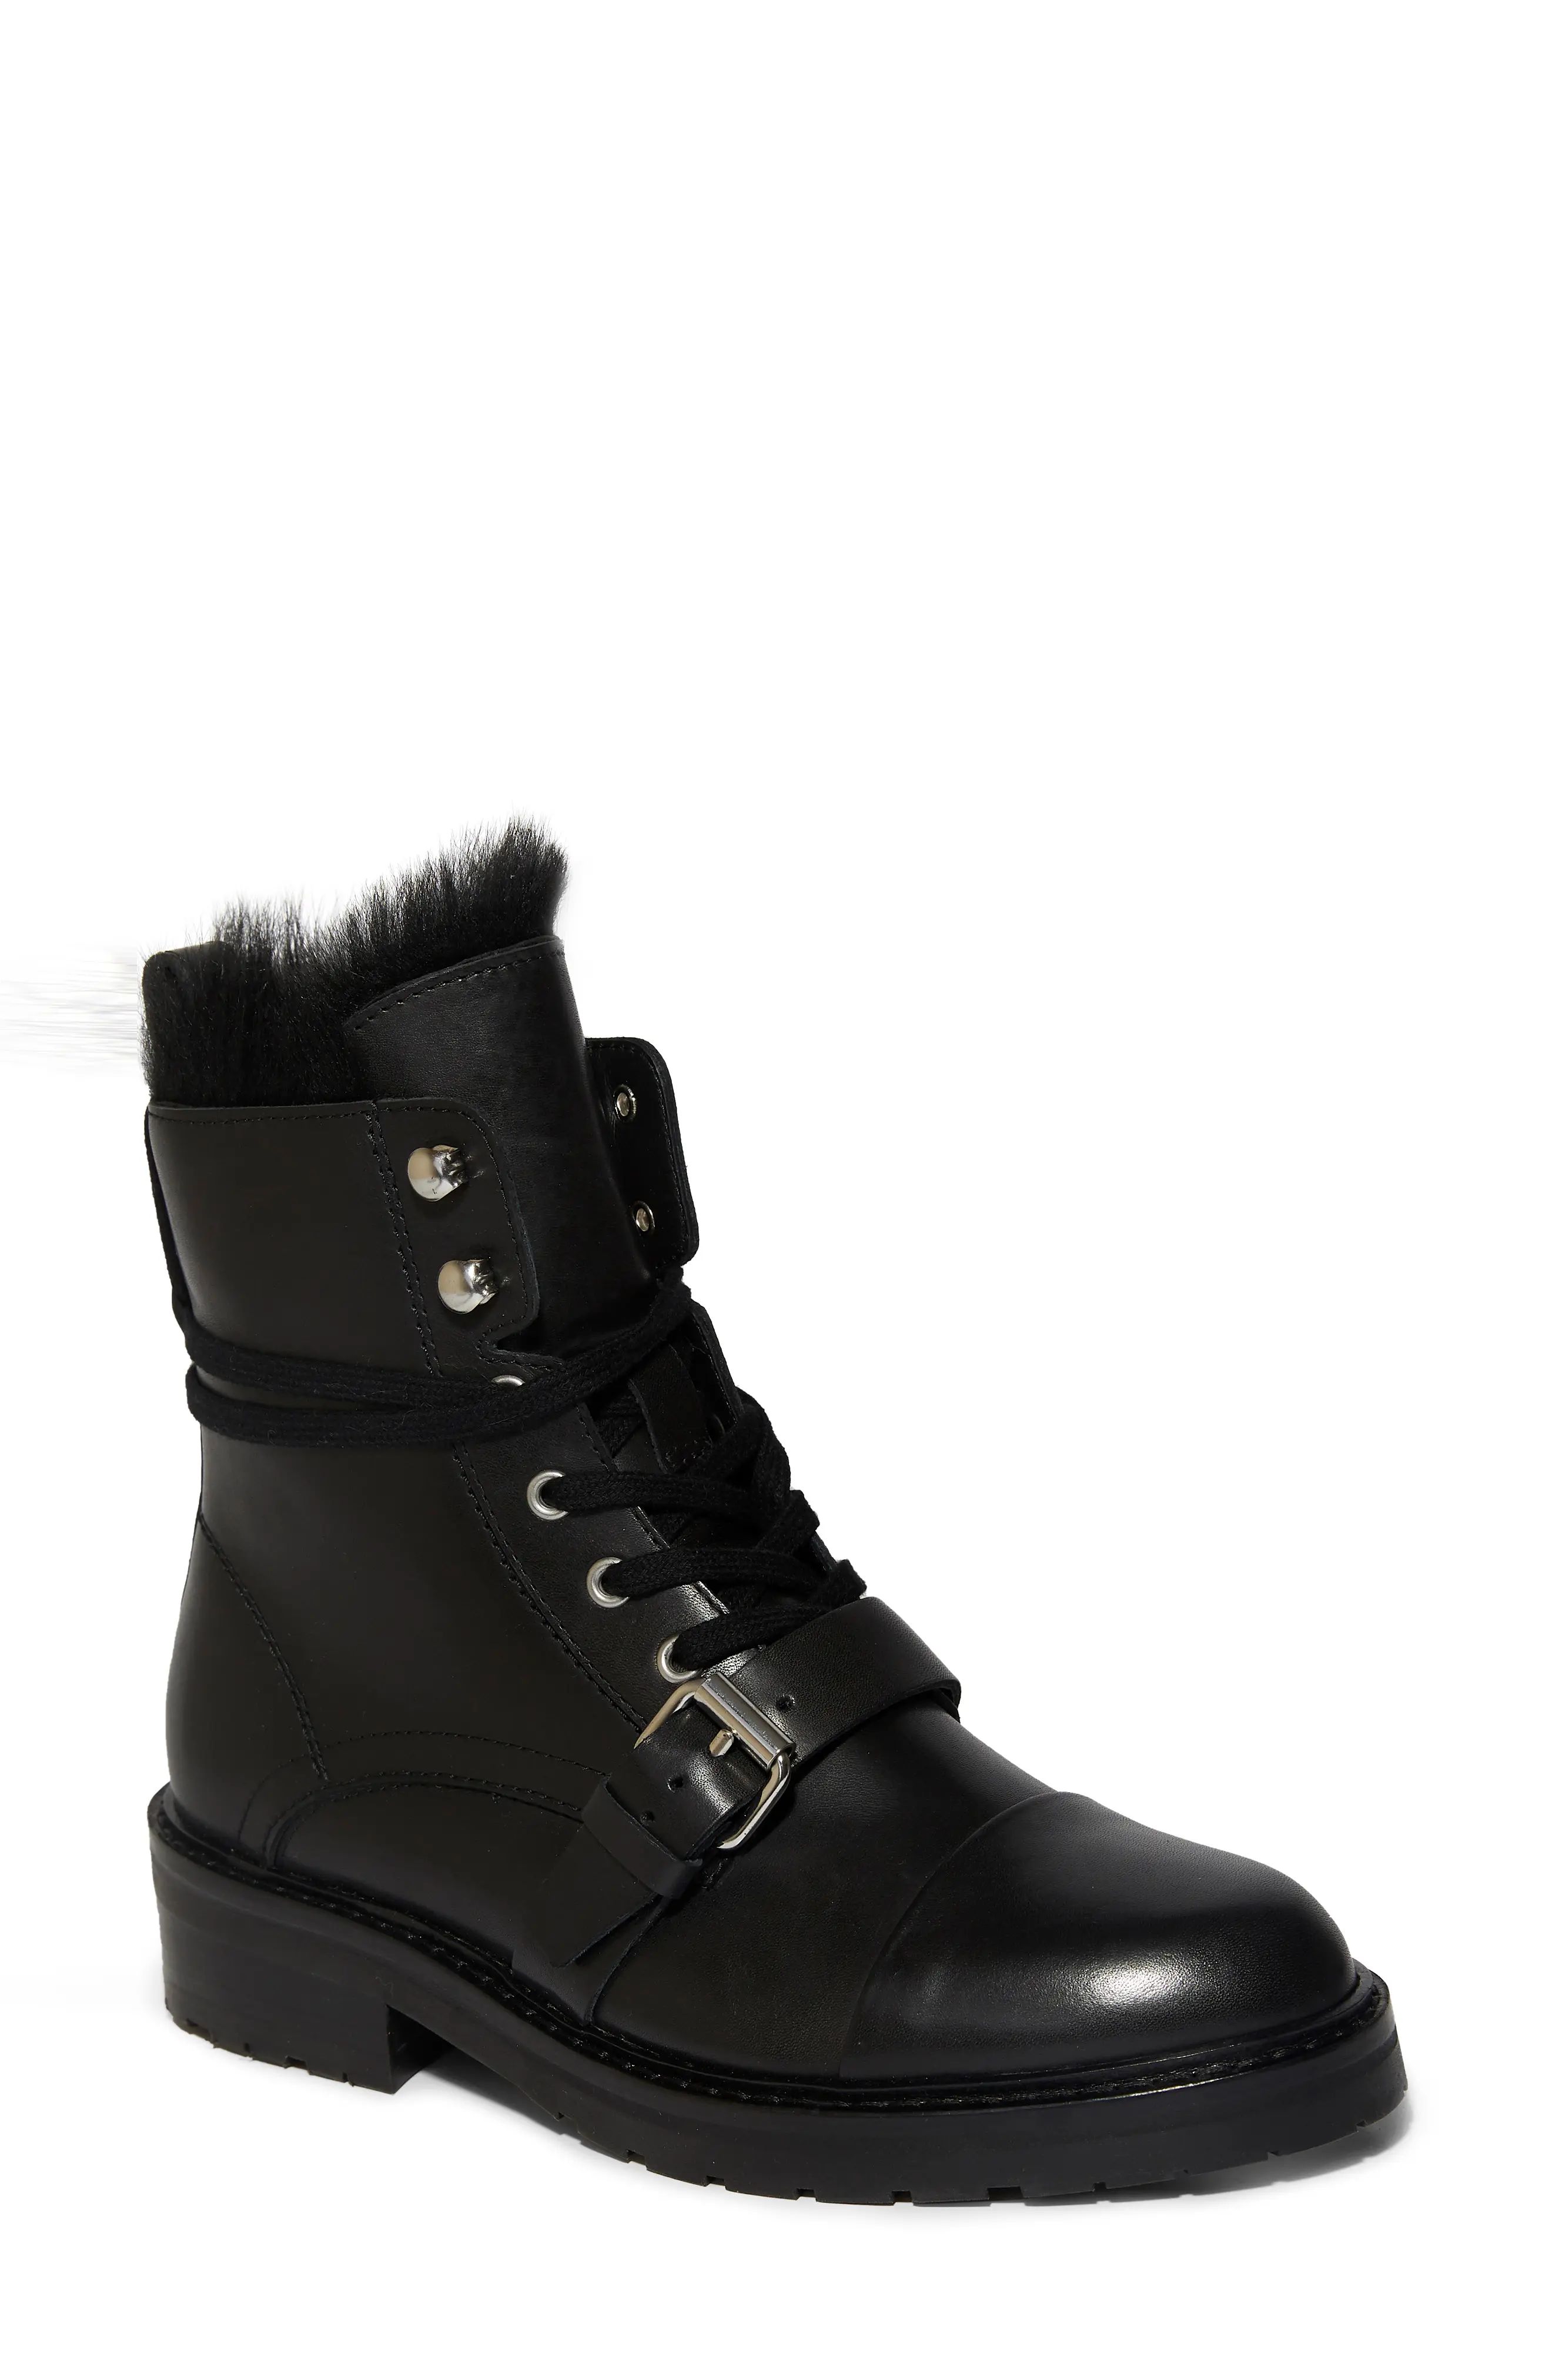 AllSaints Donita Combat Boot with Genuine Shearling Trim, Size 7Us in Black Shearling Leather at Nor | Nordstrom